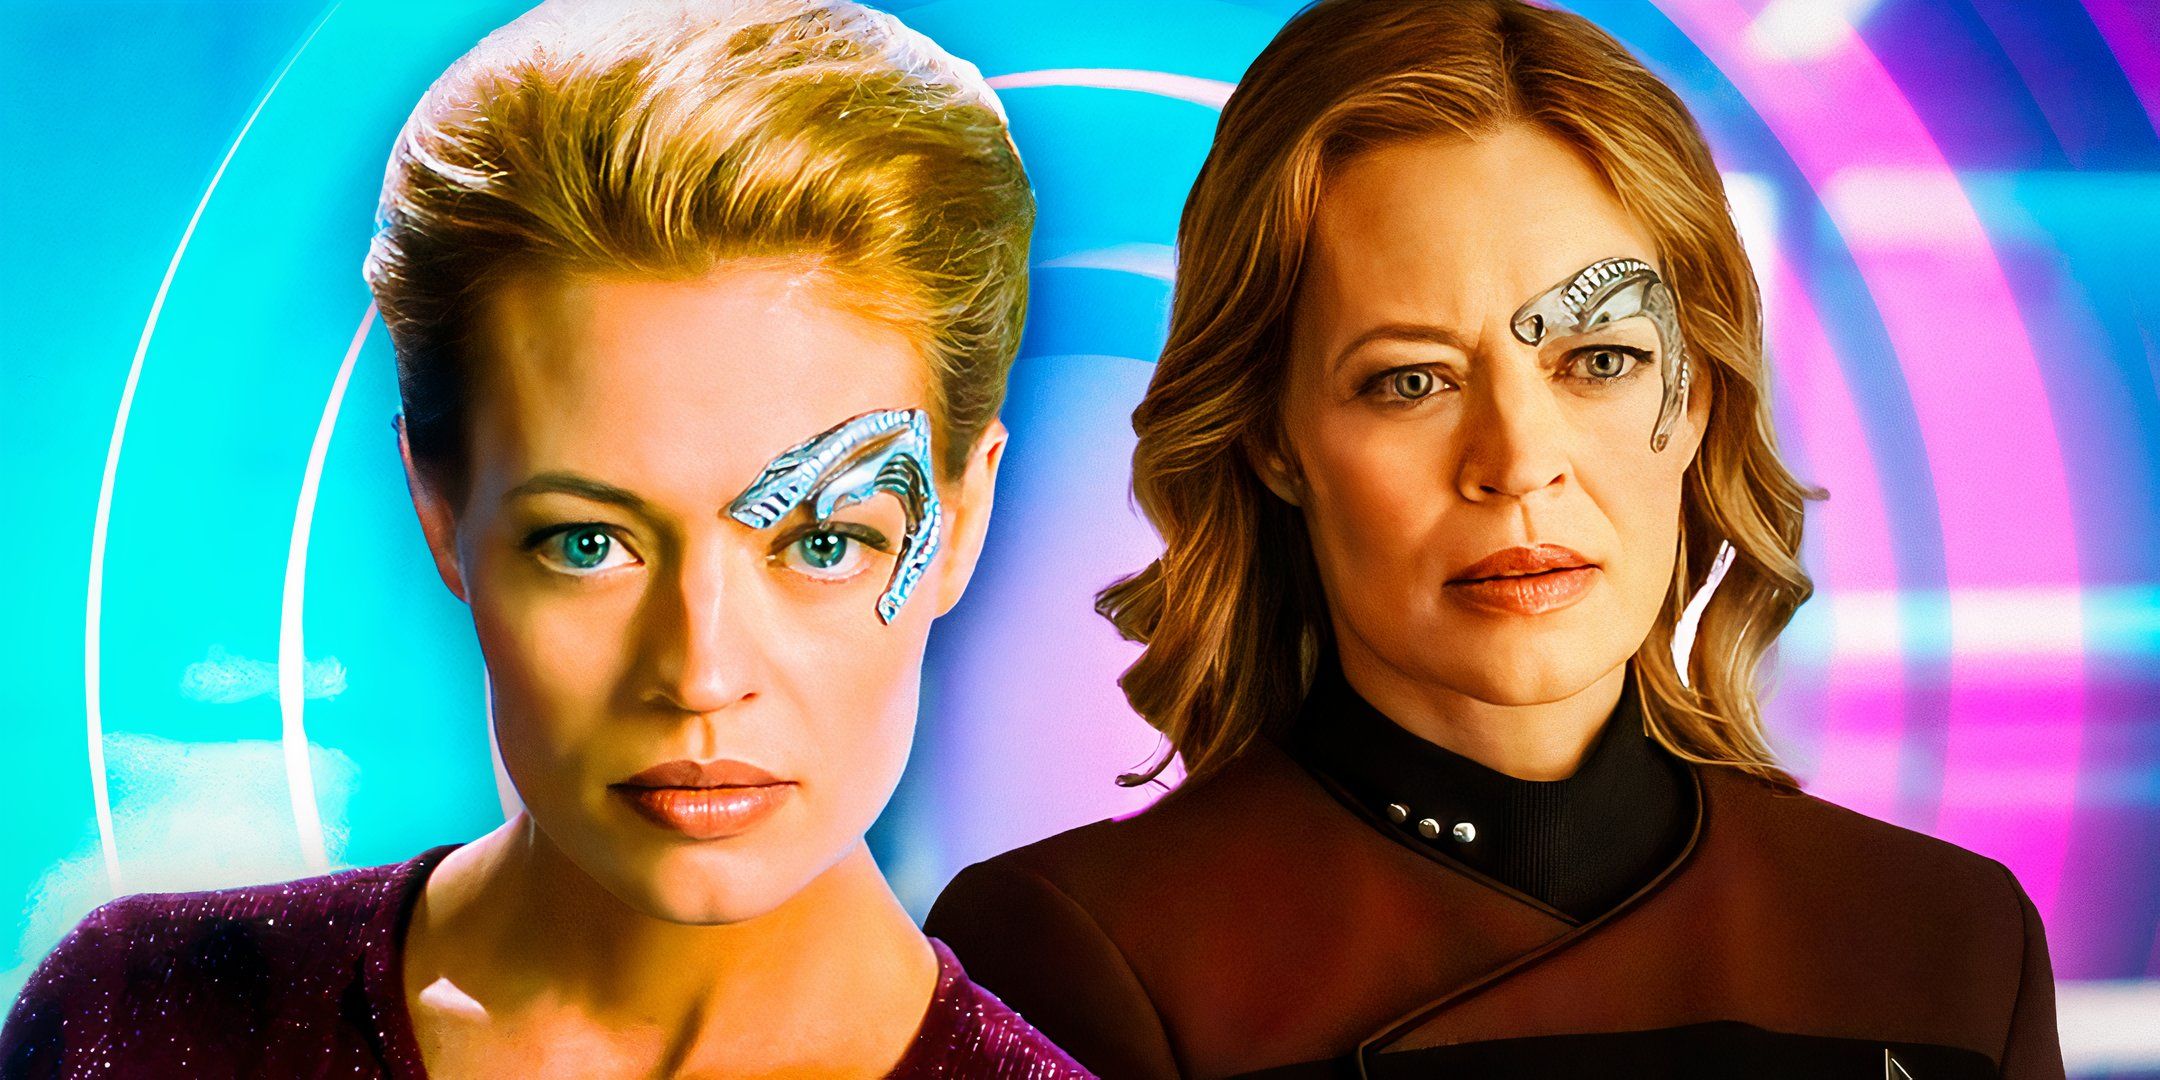 A collage of two images of Seven of Nine (Jeri Ryan), one from Star Trek: Voyager and one from Star Trek: Picard, on a blue and pink background.